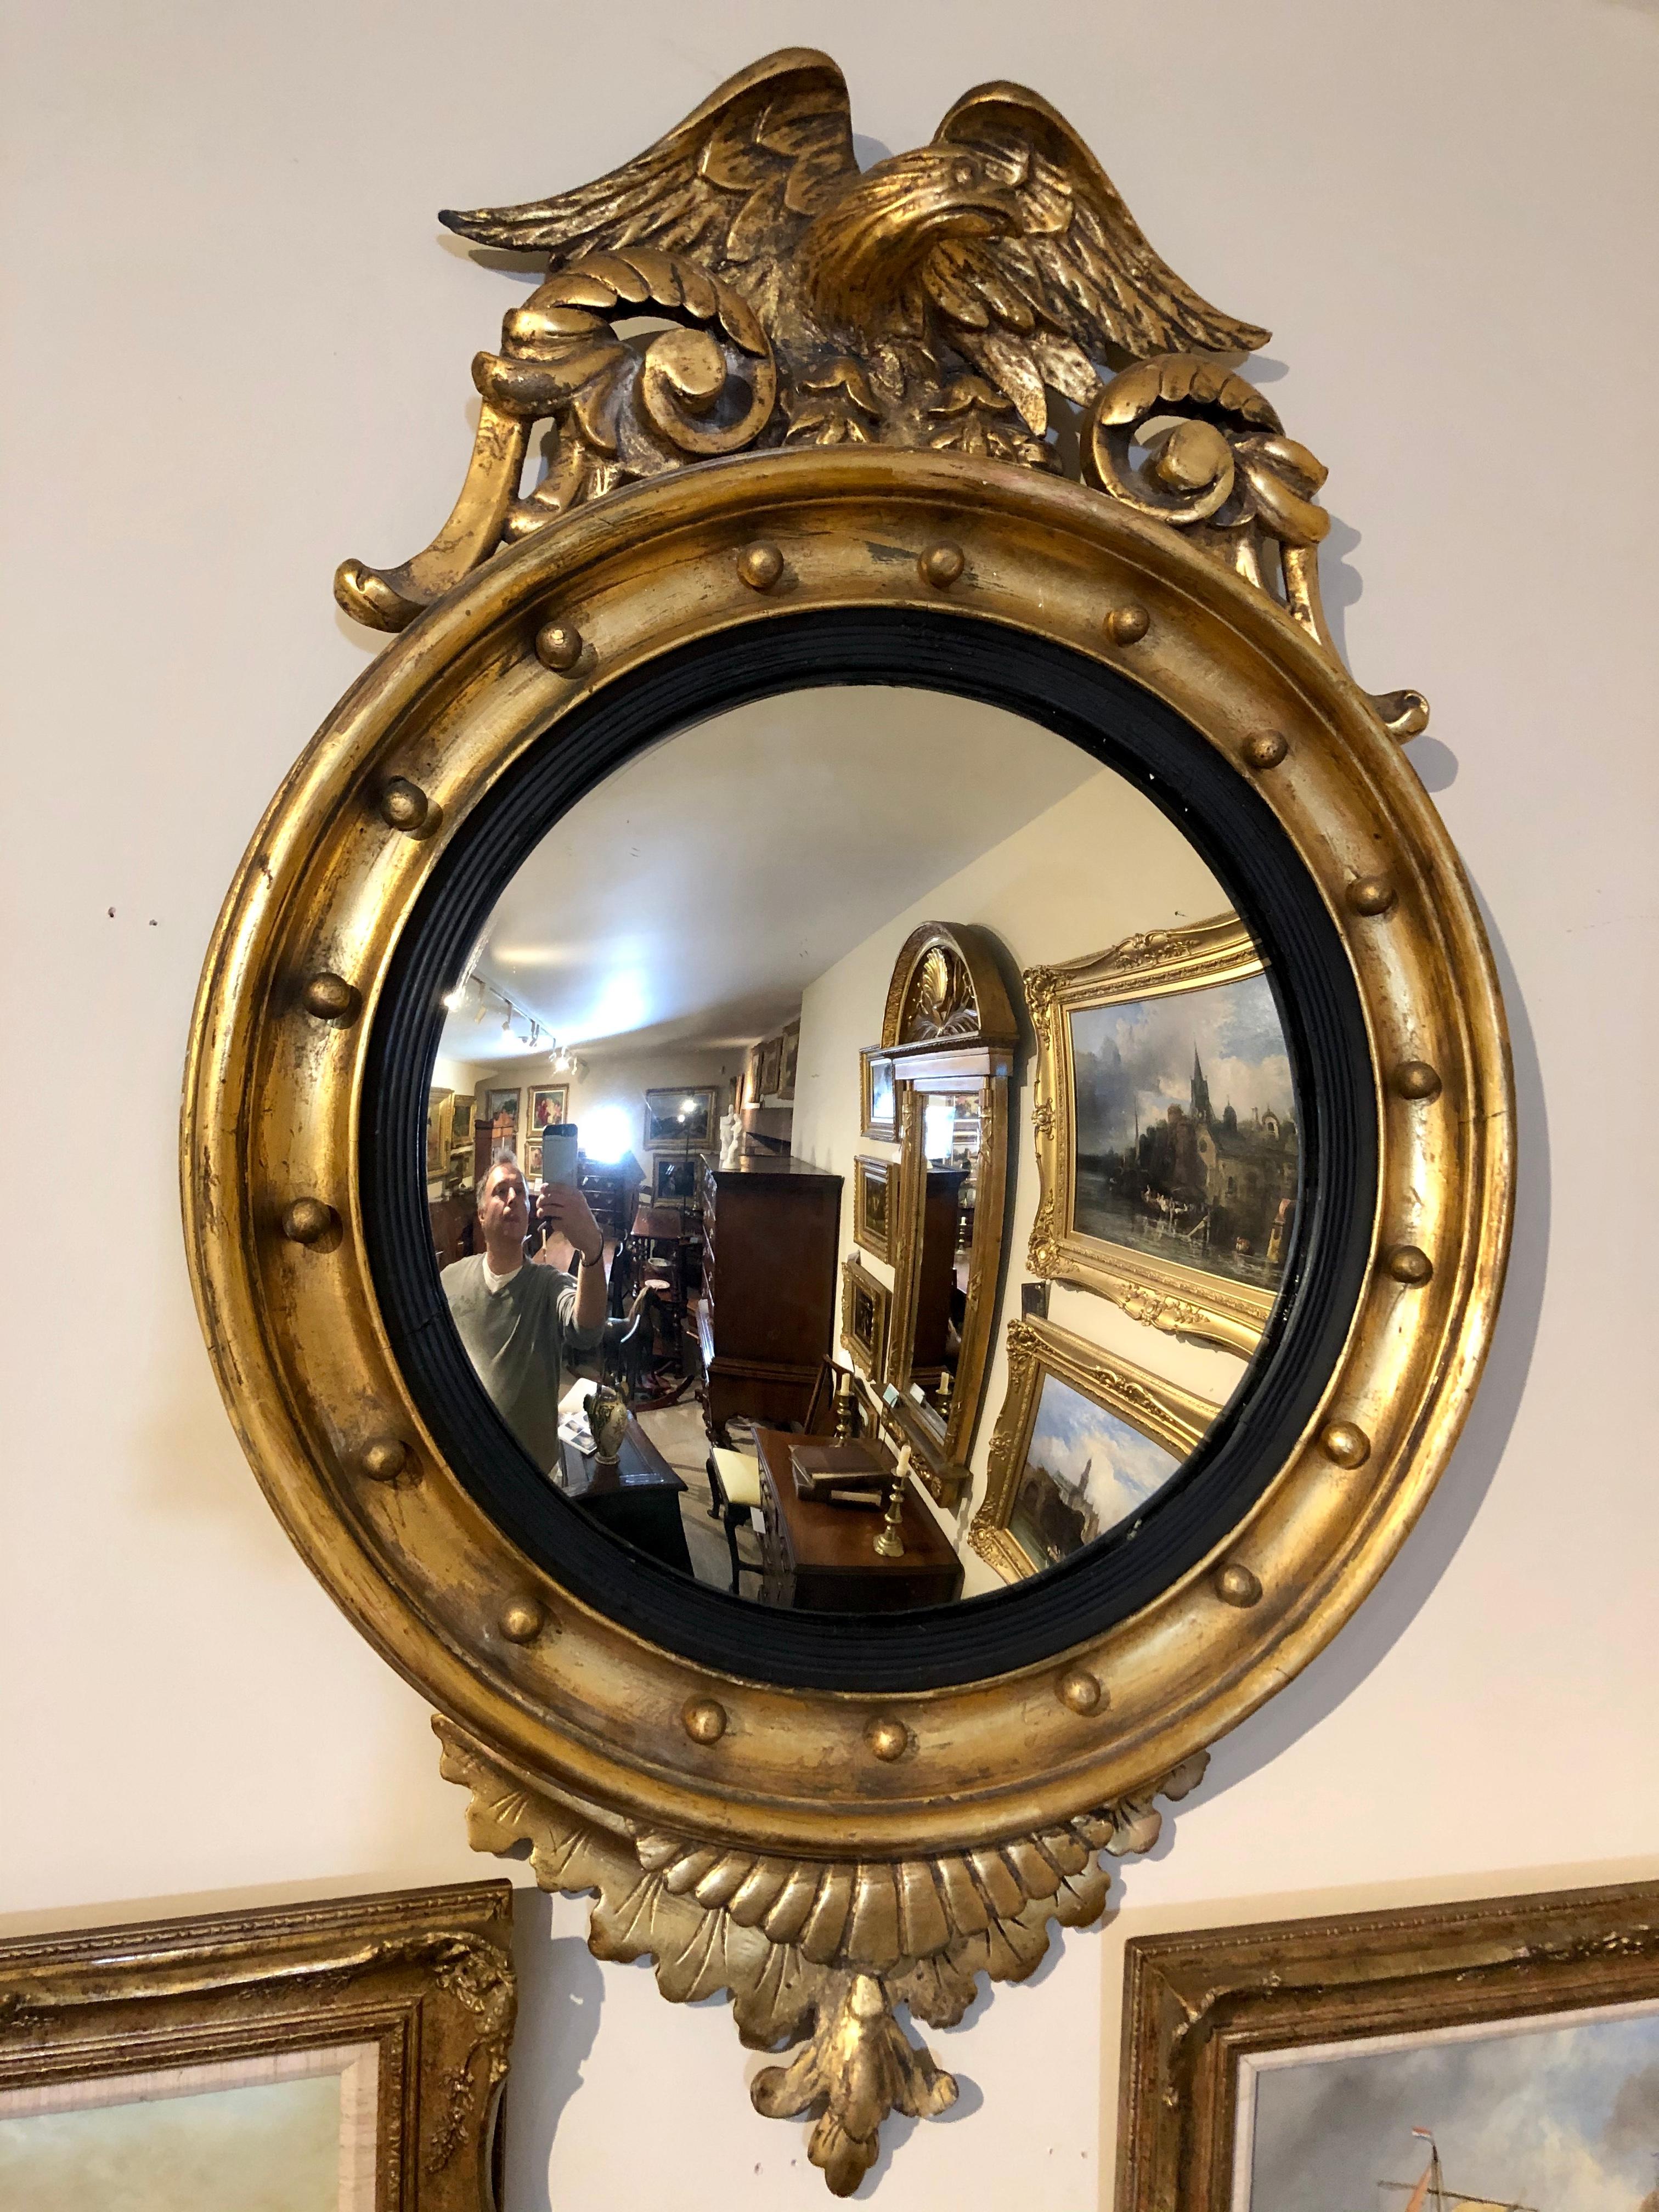 Good quality nicely proportioned 19th century English giltwood convex or bullseye wall mirror with an Eagle surmount and tail feather decoration to the underside. Ball shot decoration surrounds the gentle convex mirror. Original condition. A perfect